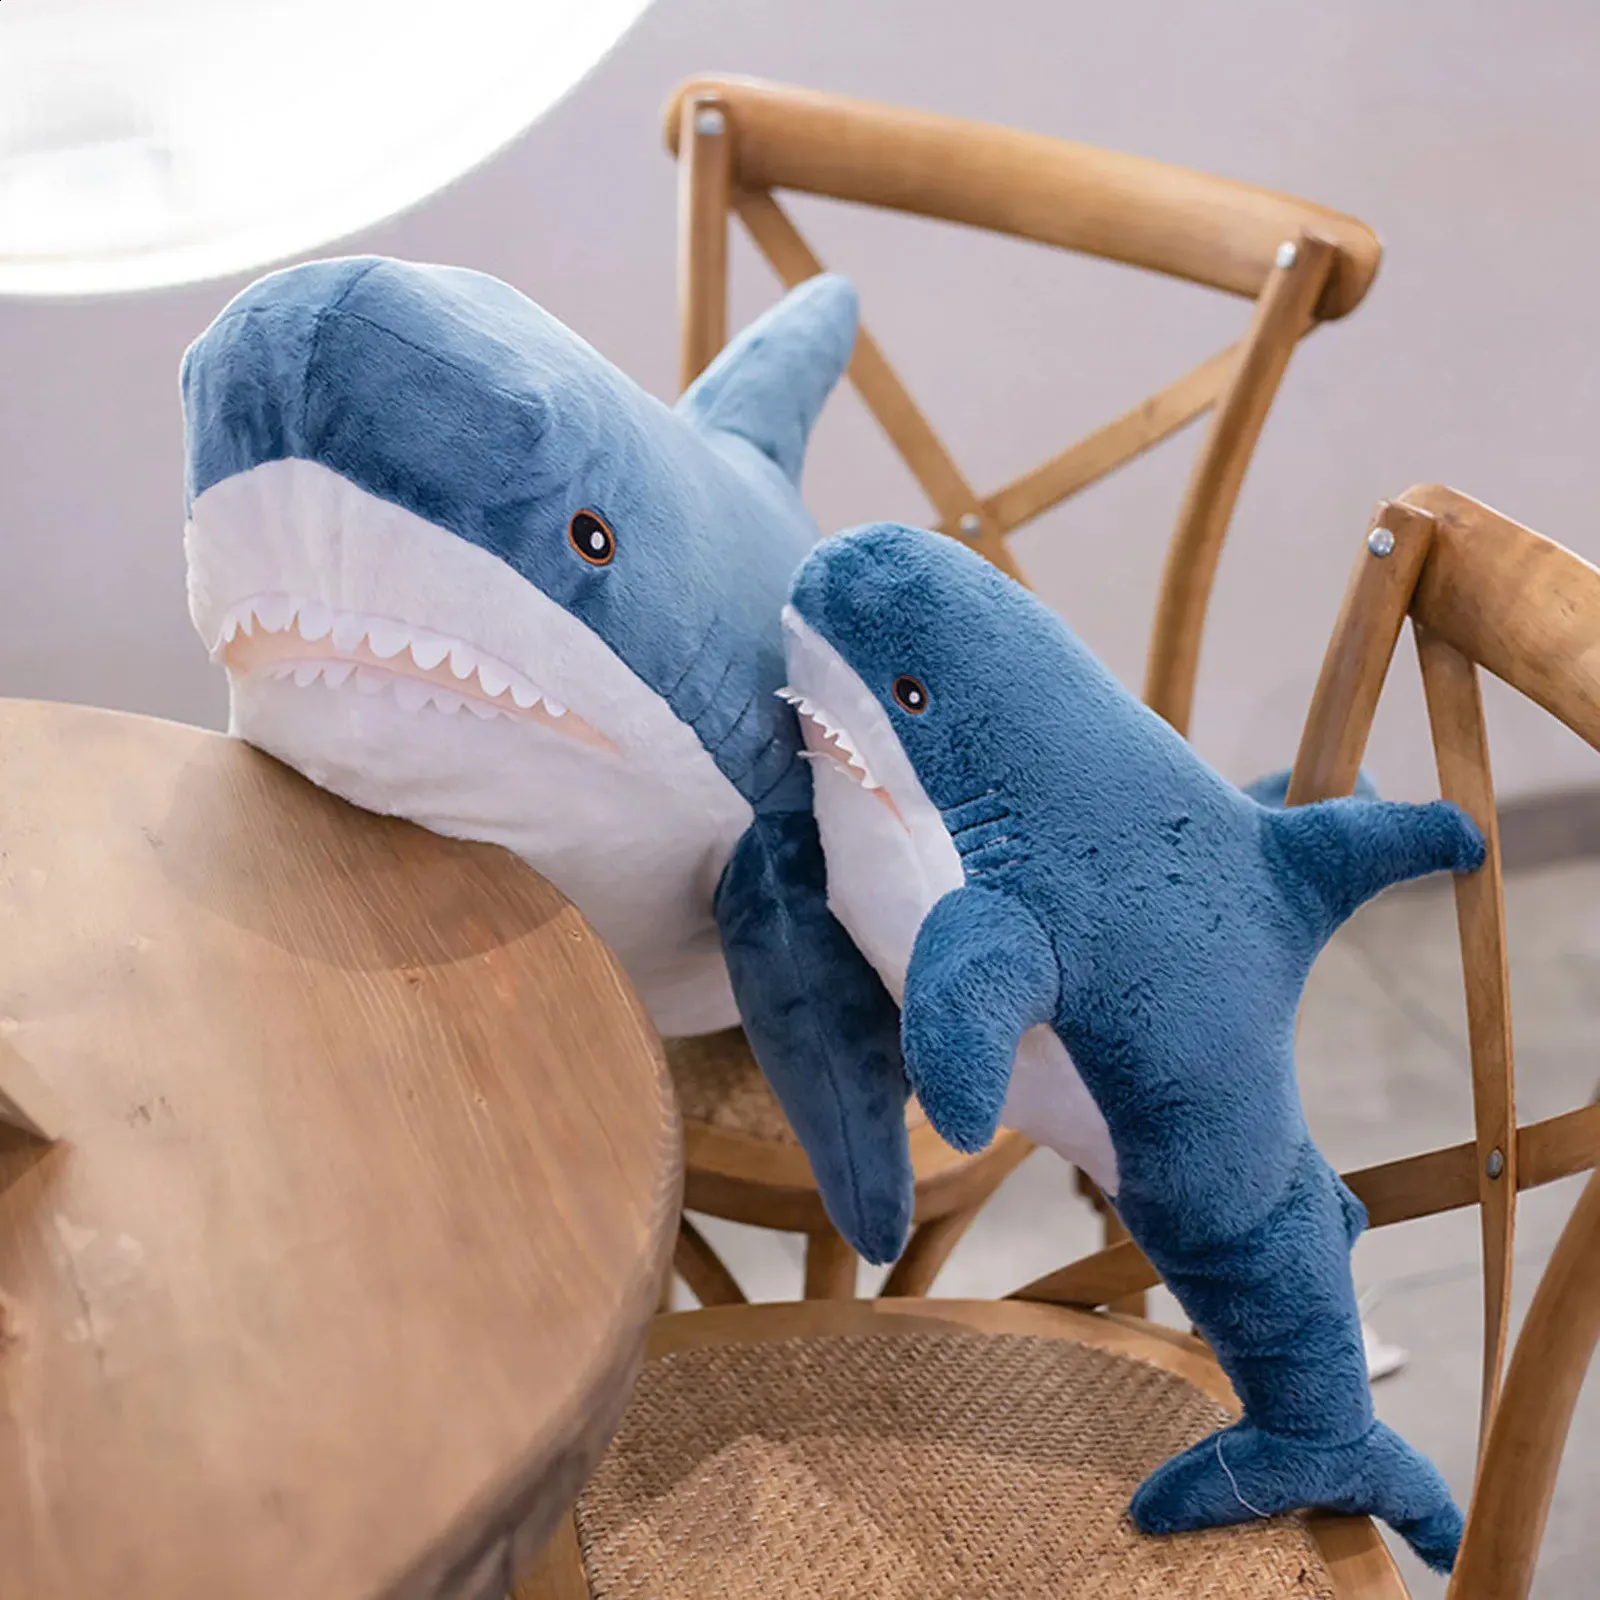 Plush Keychains 2Sizes Giant Shark Toy Soft Stuffed Animal Pillow Cute Blue  Doll For Birthday Gifts Gift For Children 231218 From Deng08, $8.82